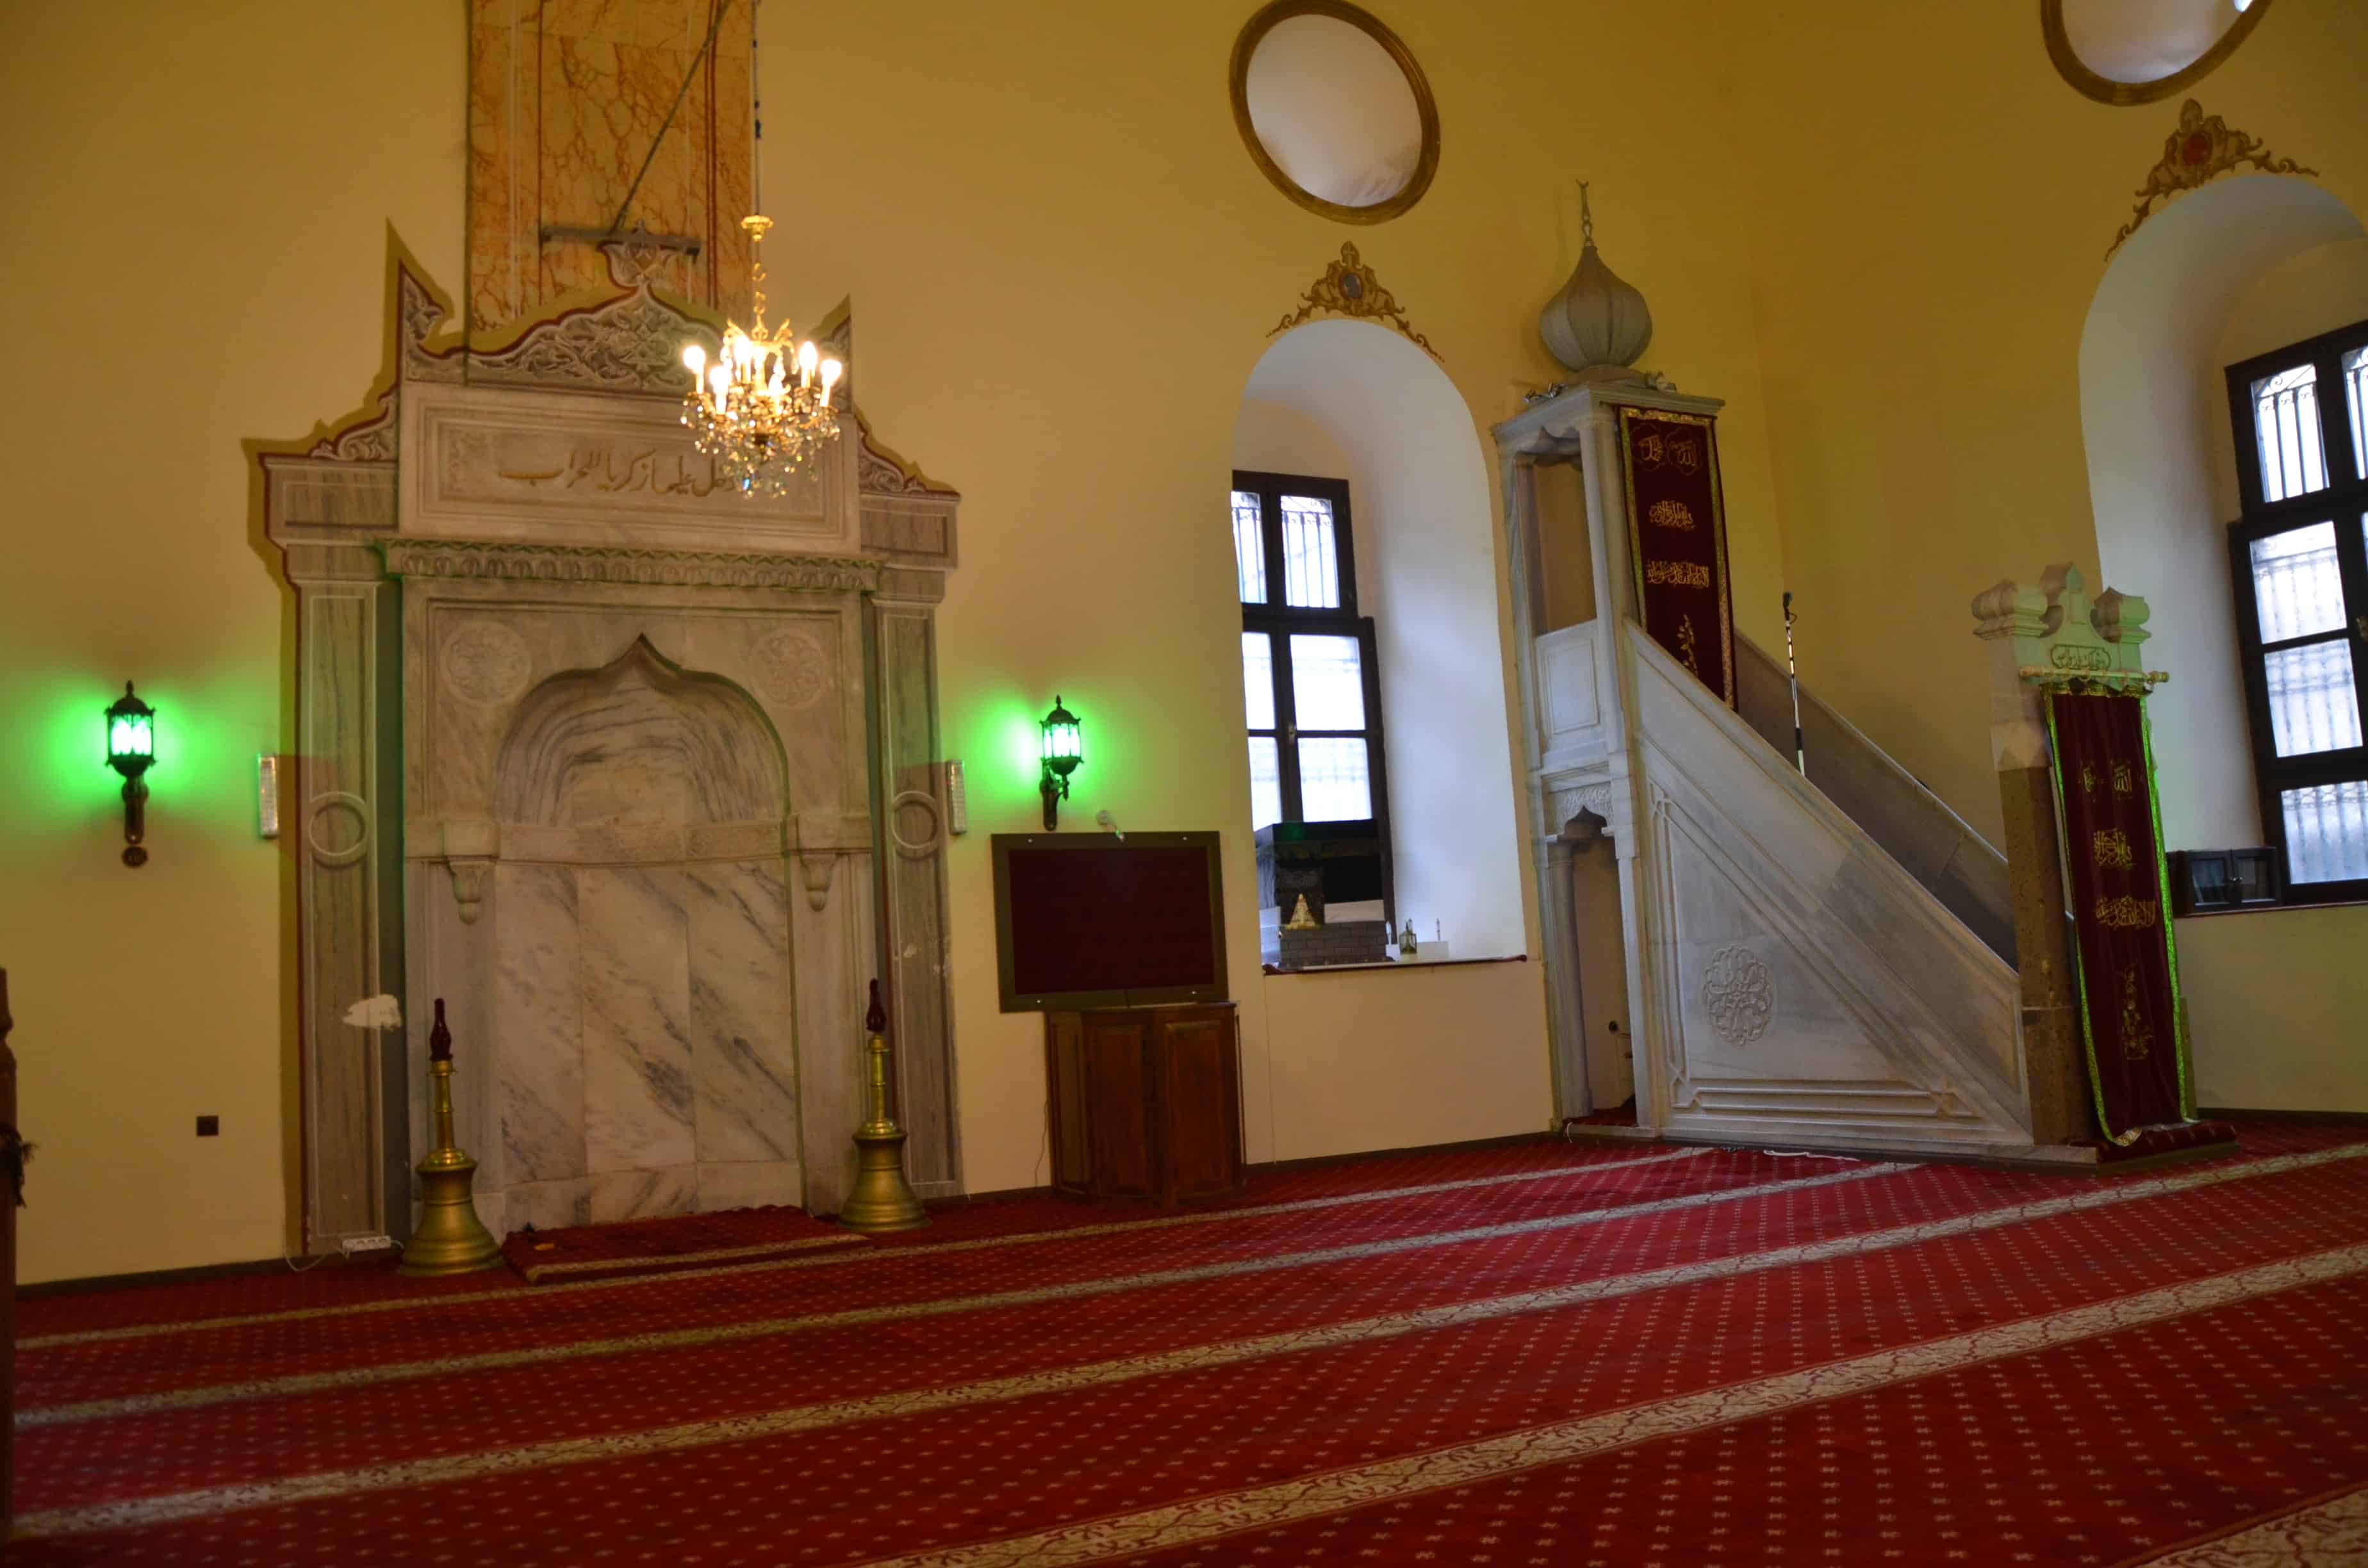 Prayer hall of the mosque at the Sultan Divani Mevlevi Lodge Museum 